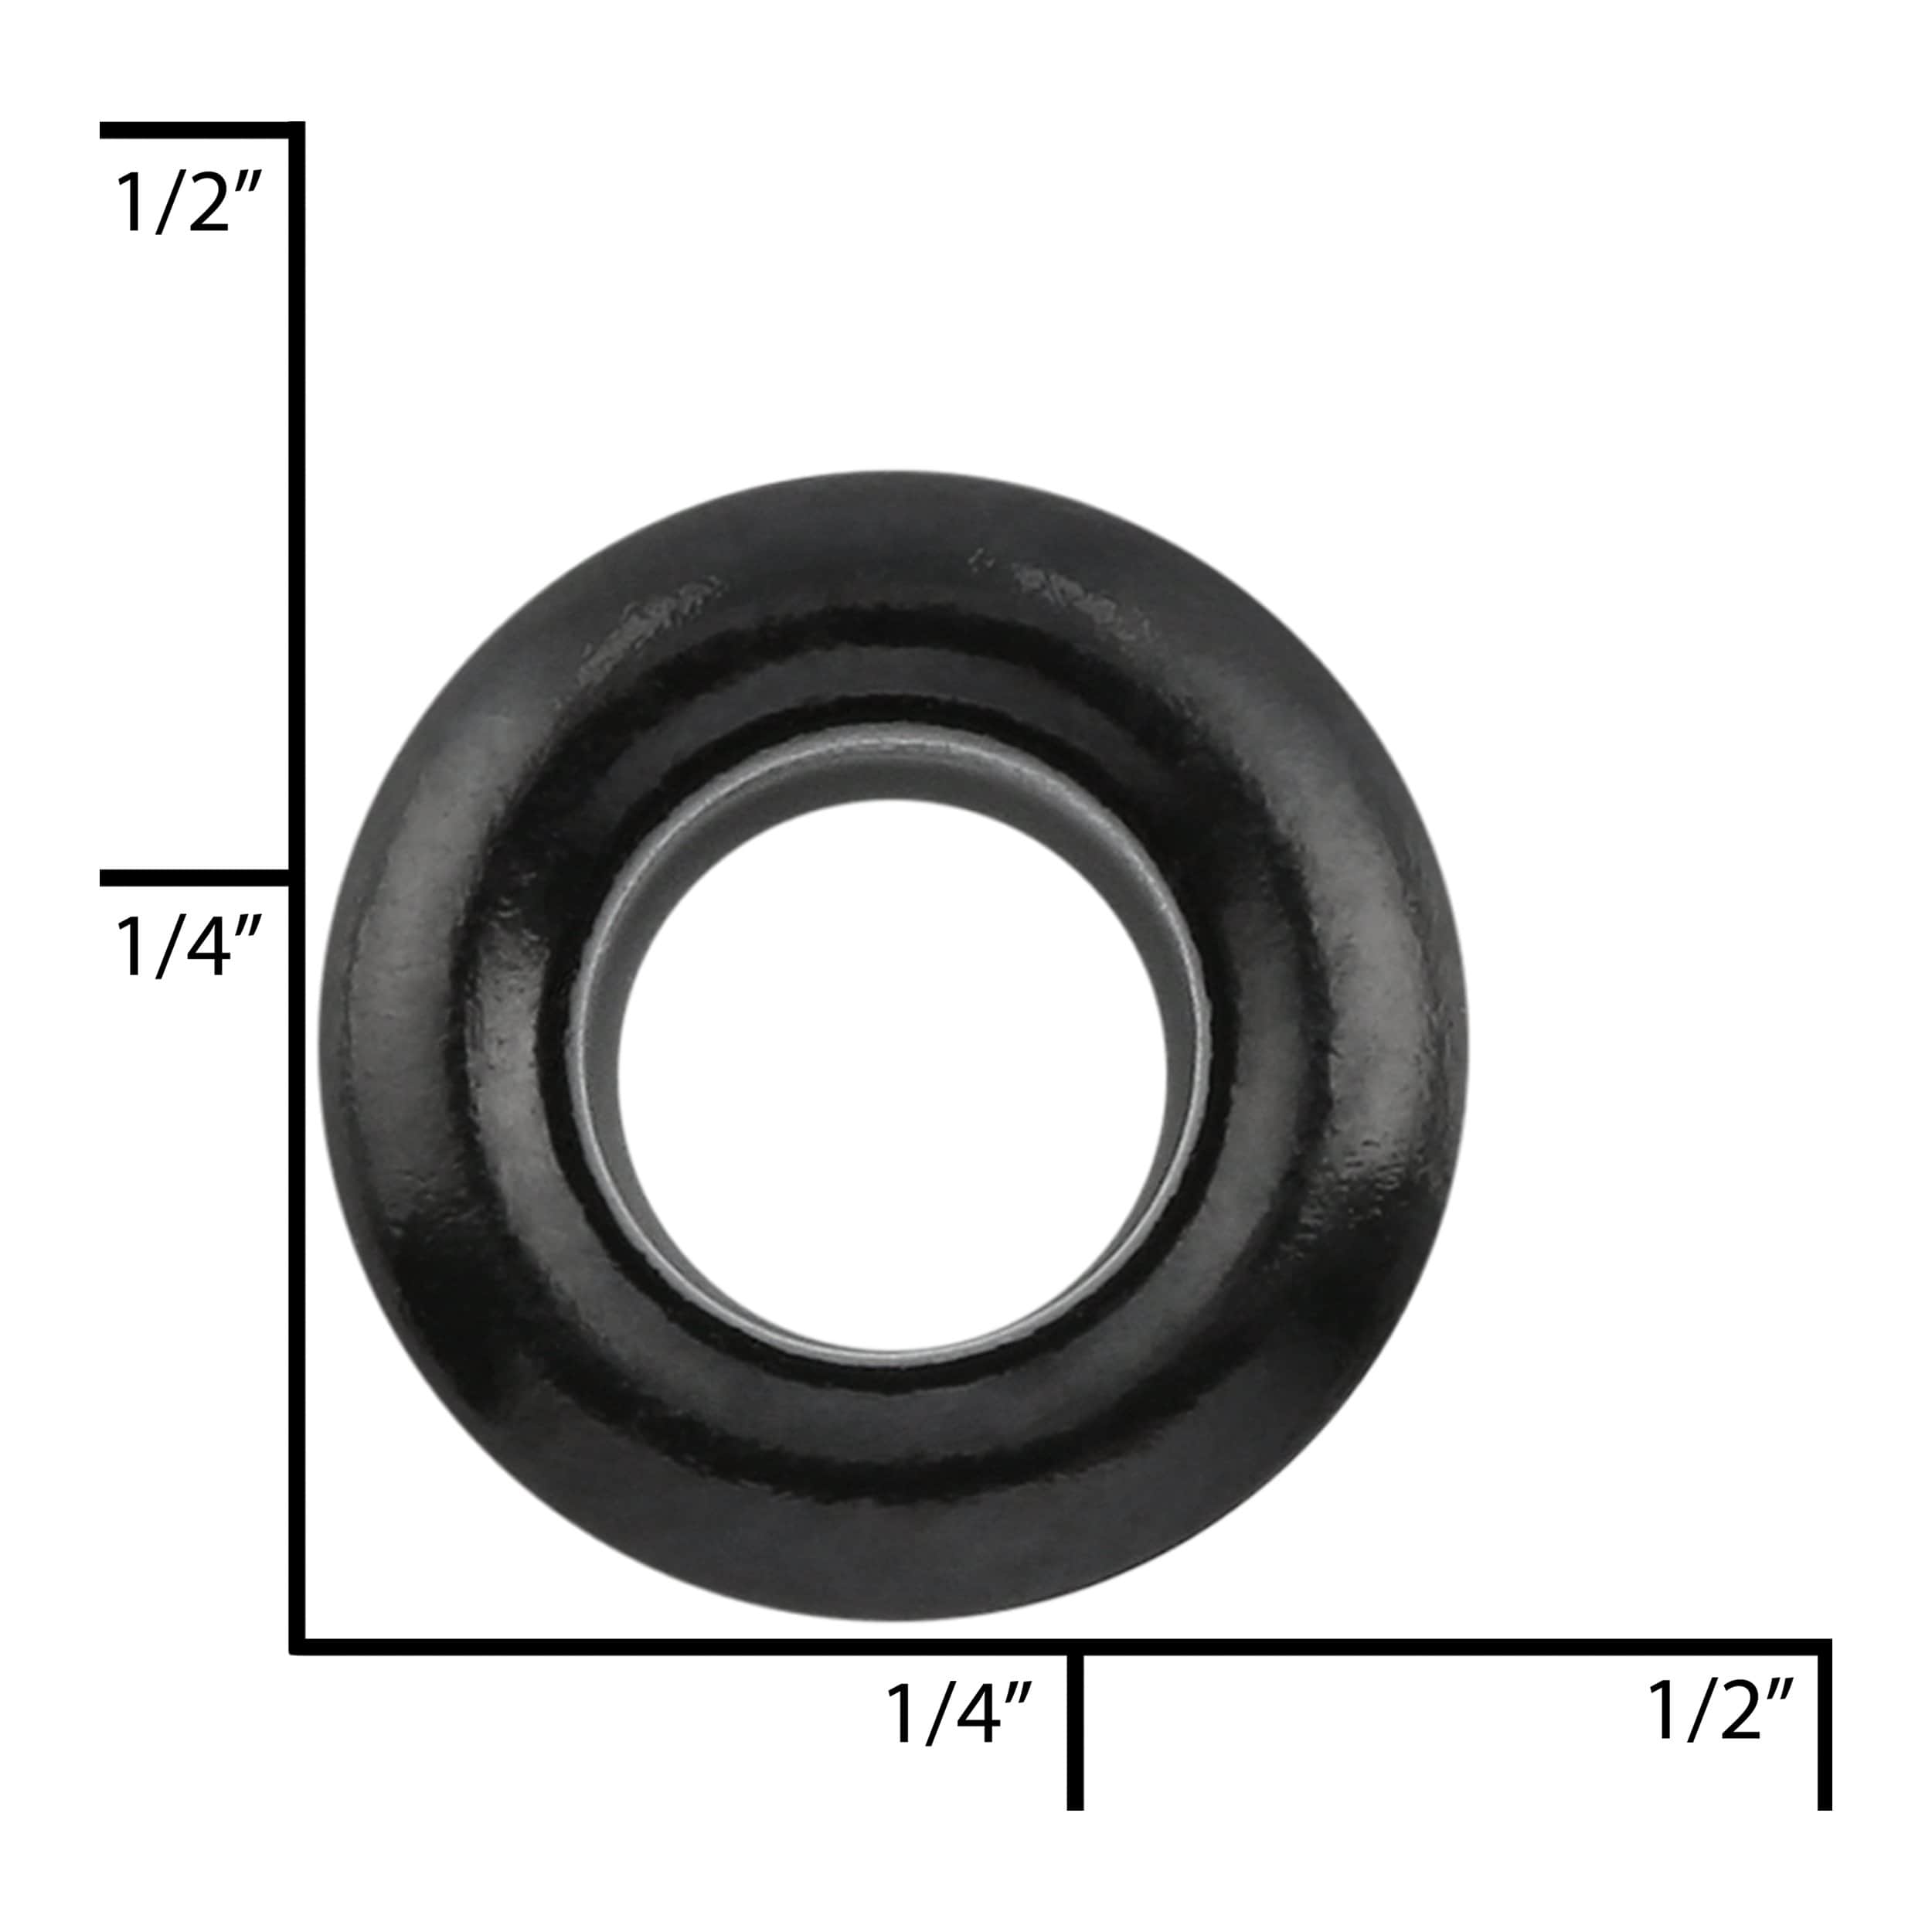 Ohio Travel Bag Fasteners 11/32" Black, Eyelet, Solid Brass - 12 pk, #A-345-BLK A-345-BLK